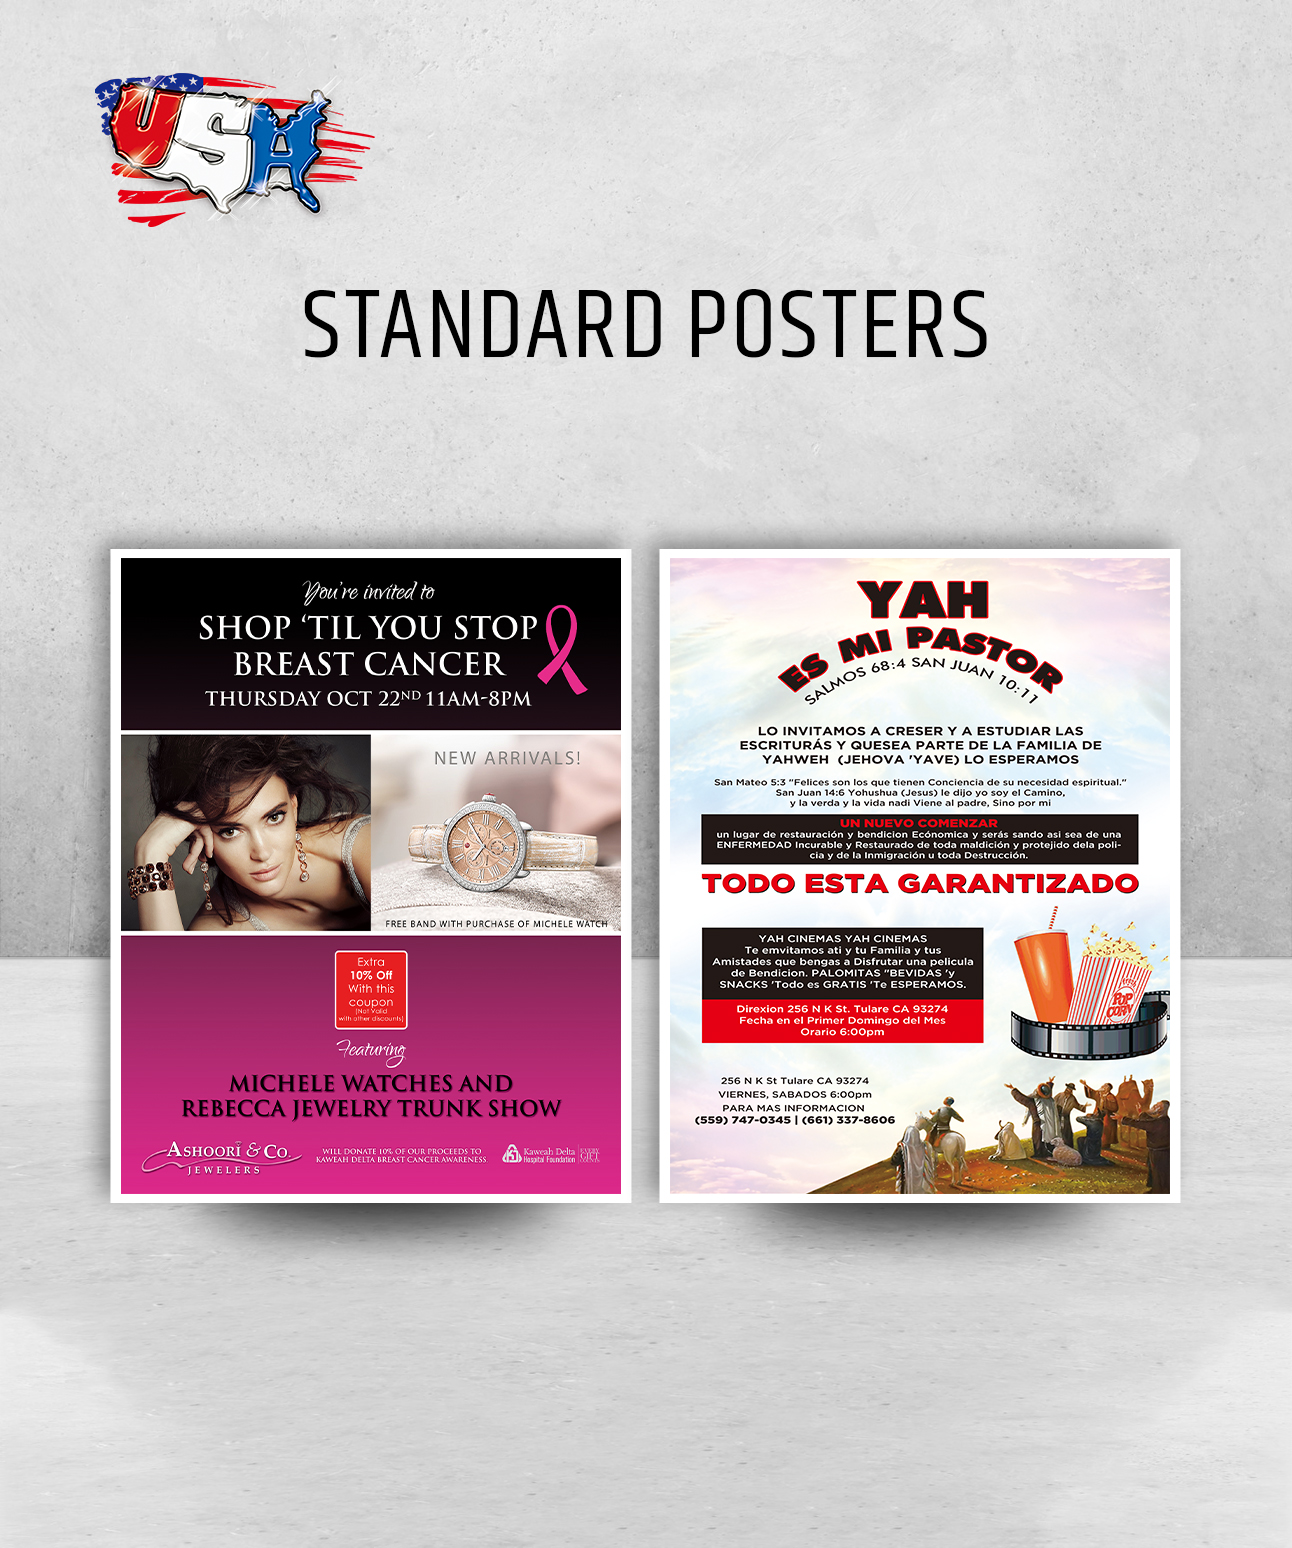 Standard Posters